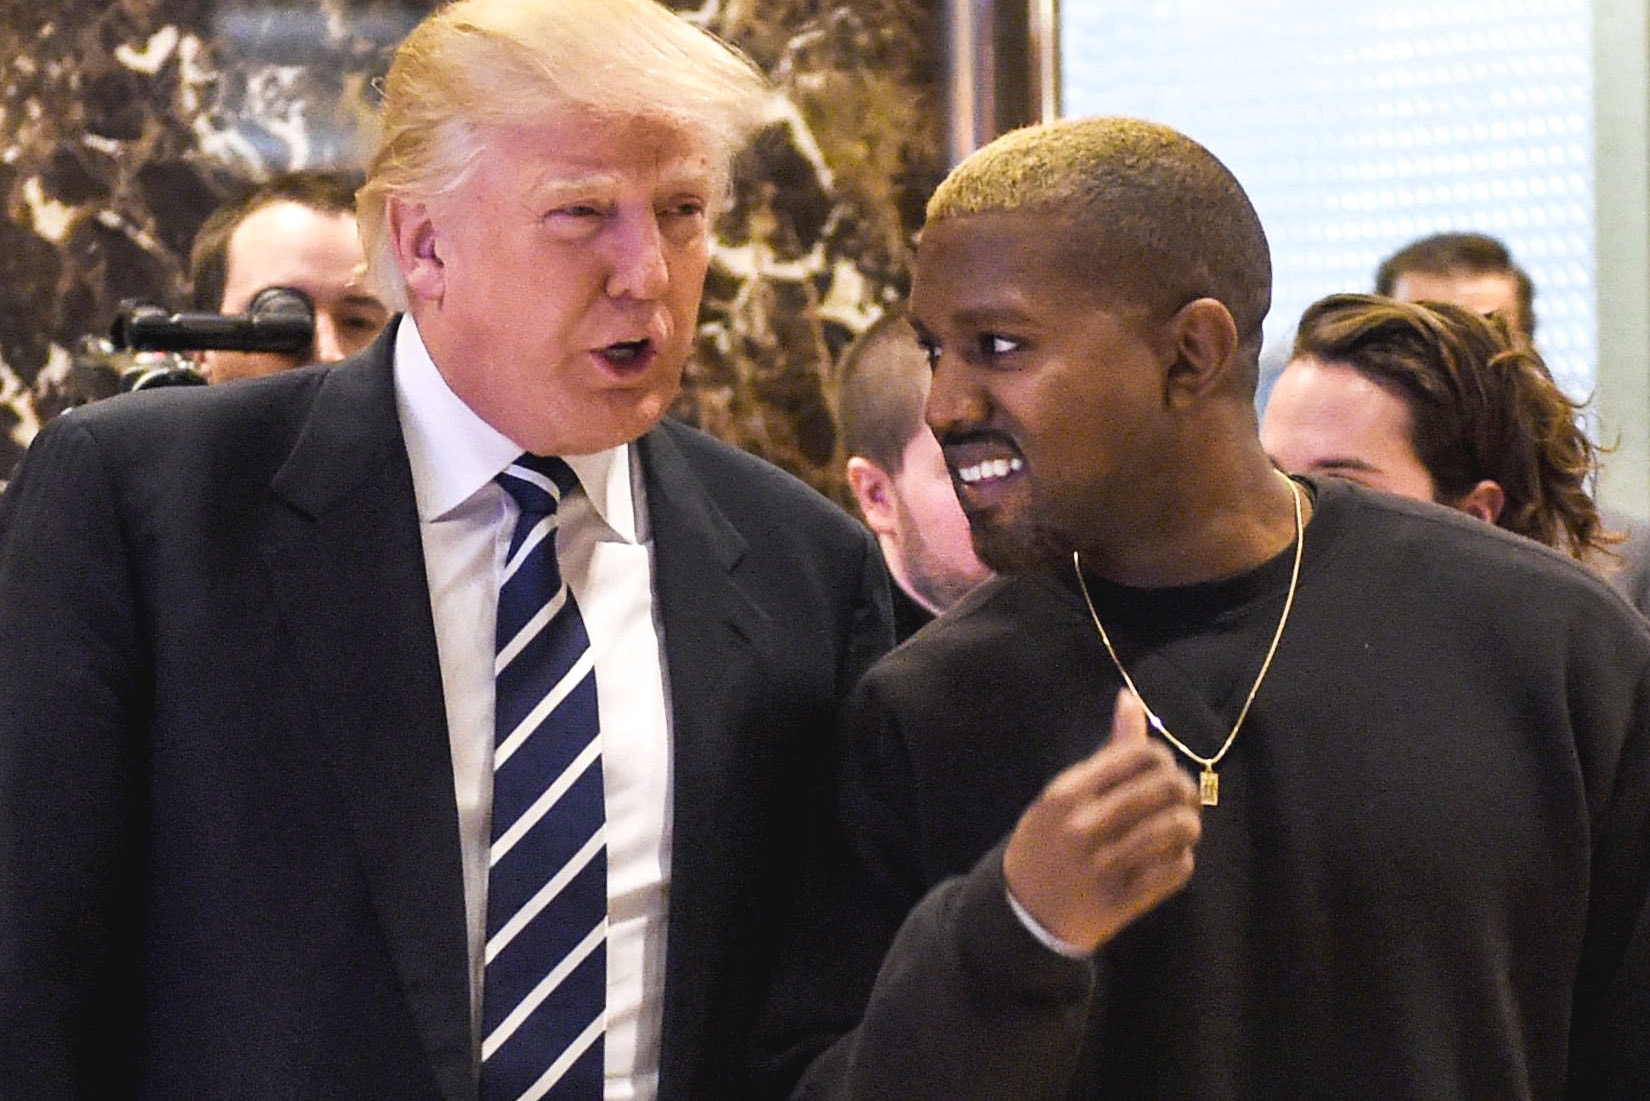 Kanye West Starts 2019 Reaffirming His Support of Donald Trump presidential run 